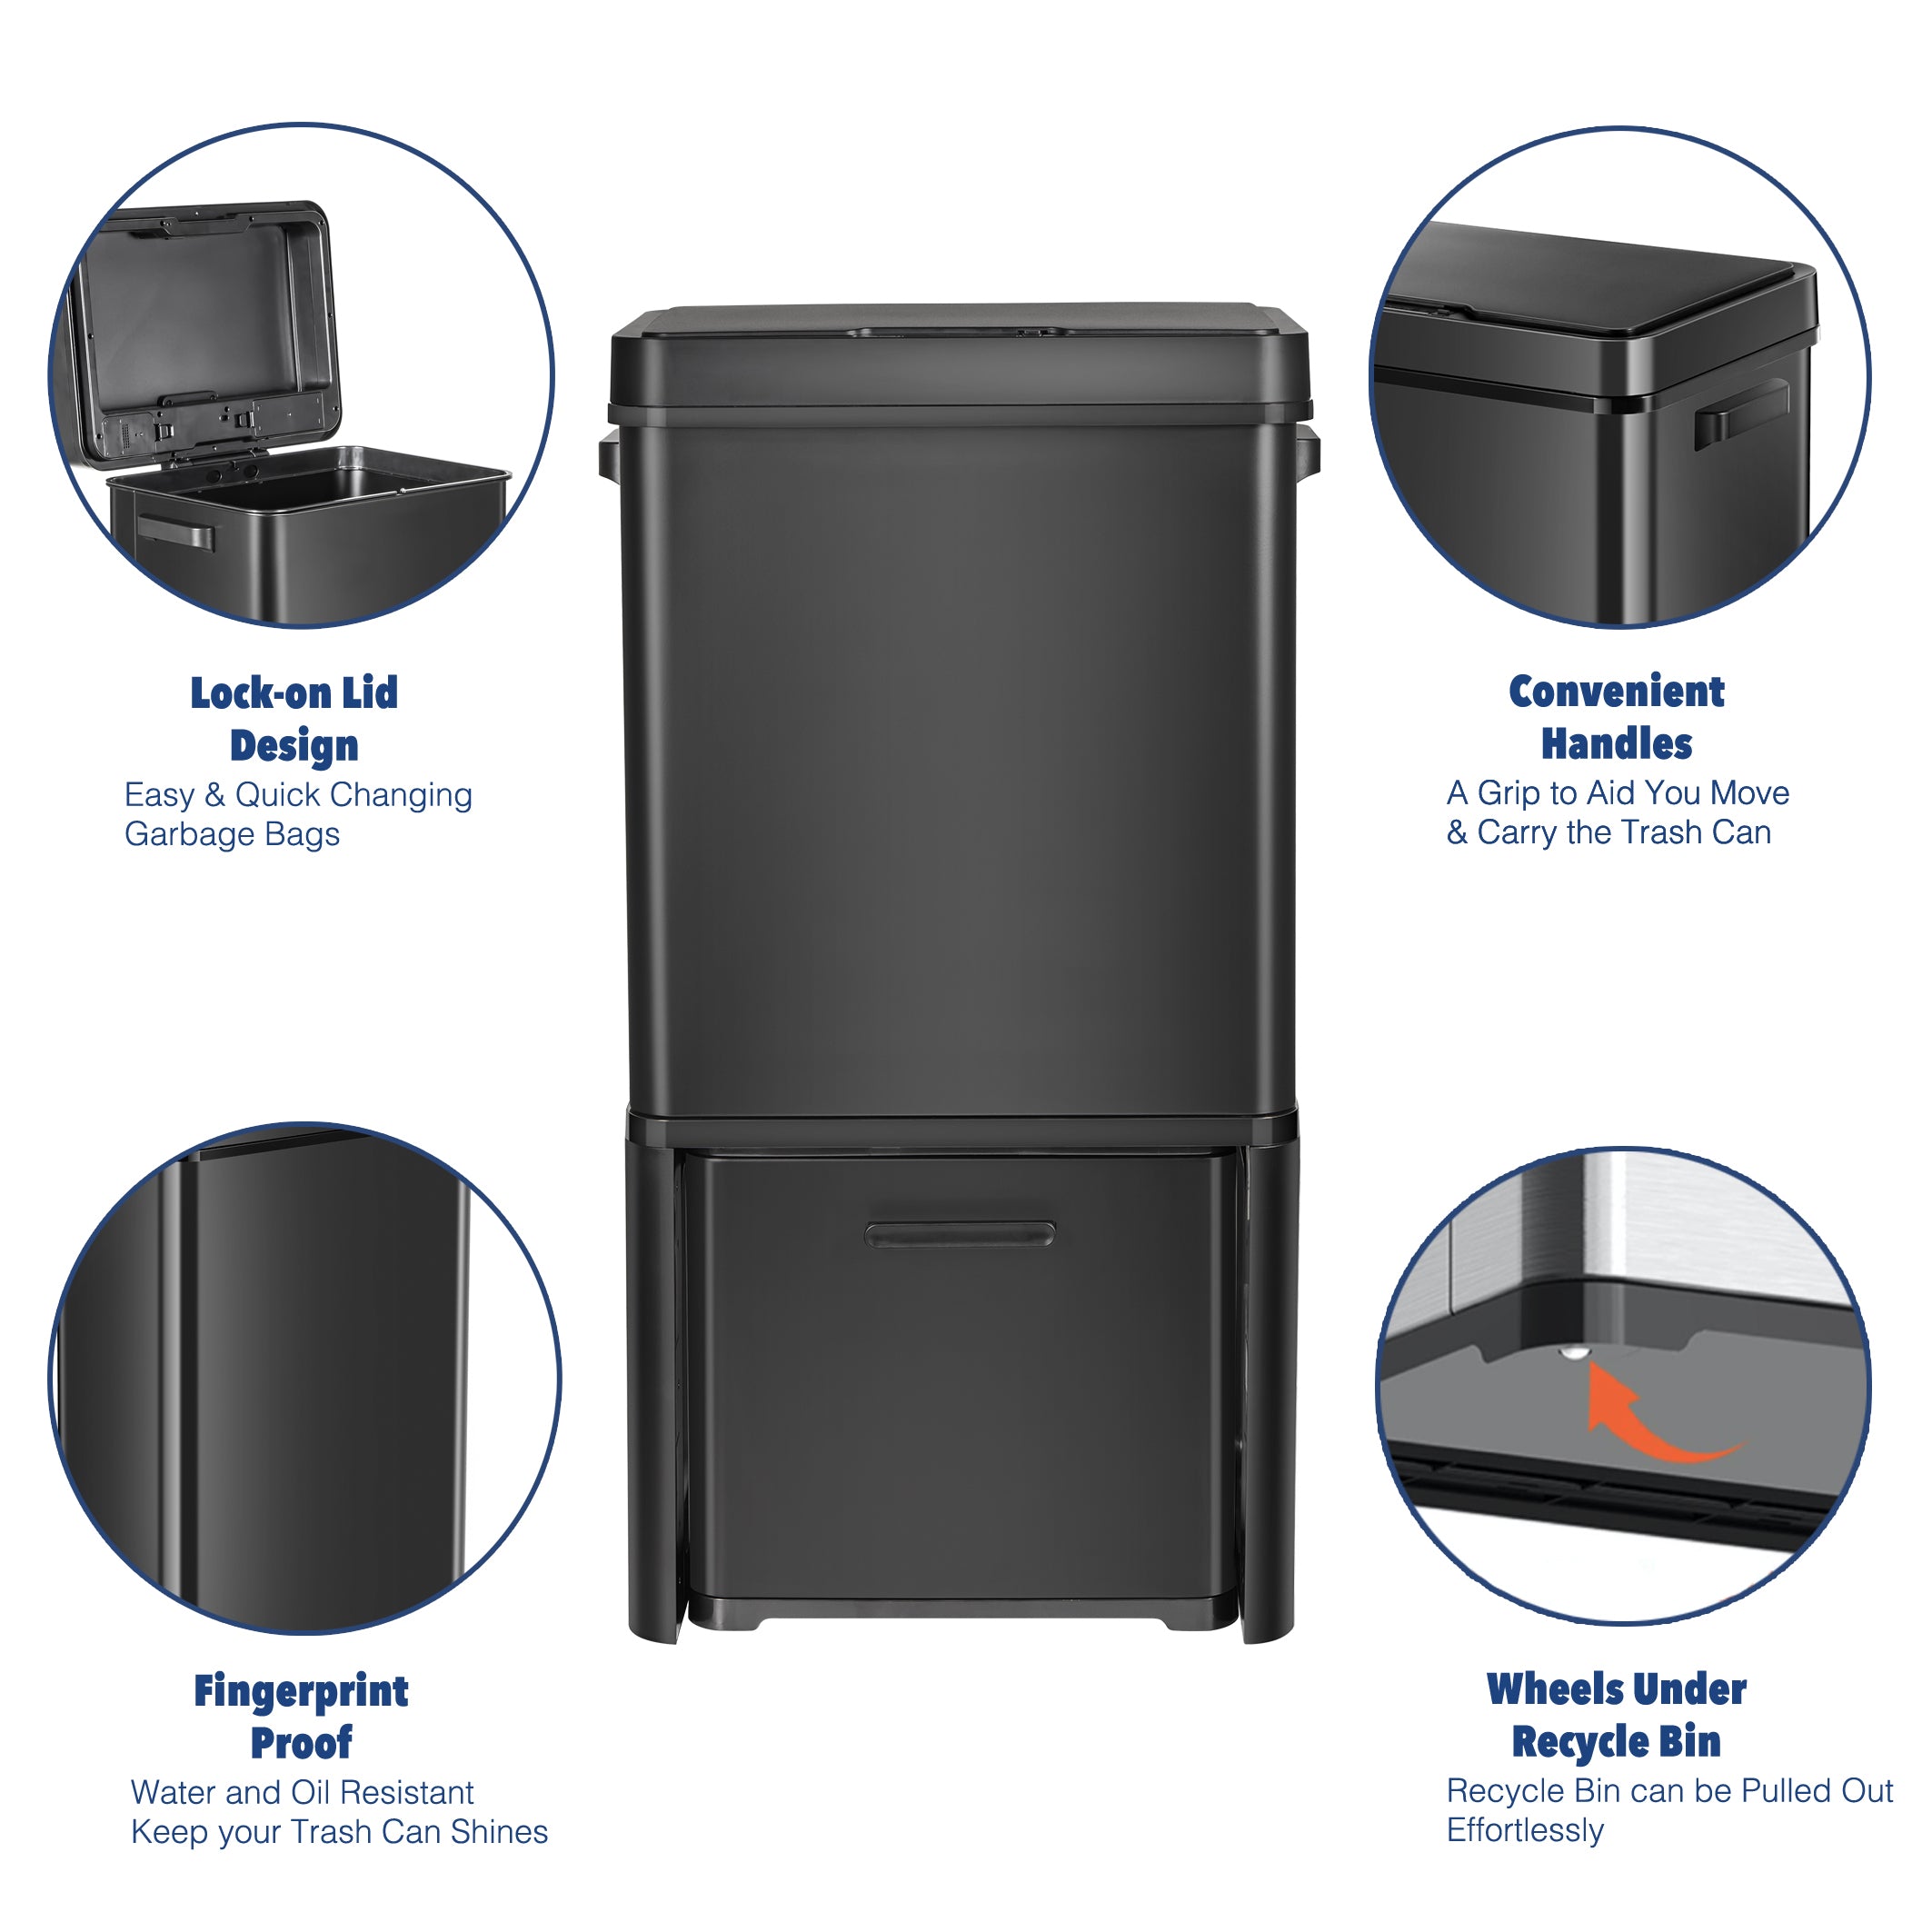 CozyBlock 20 Gallon Automatic Trash Can, Black Steel Touchless Motion Sensor Bin, Wide Opening Soft Close Lid, 75L, Large Capacity Slim Design